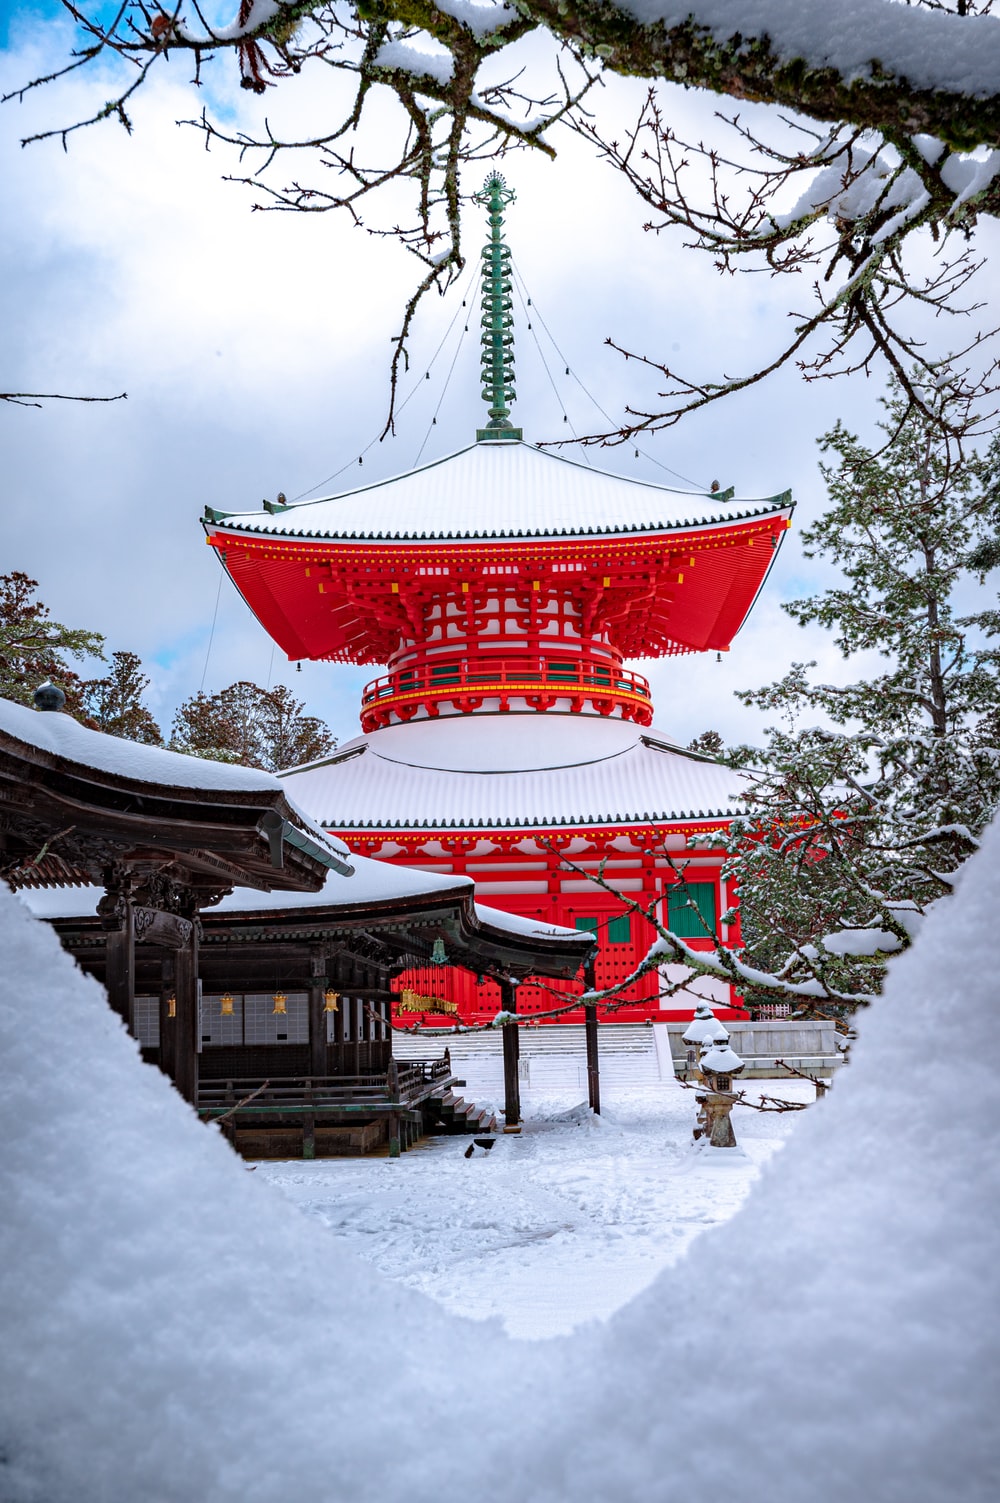 Japan Winter Picture. Download Free Image